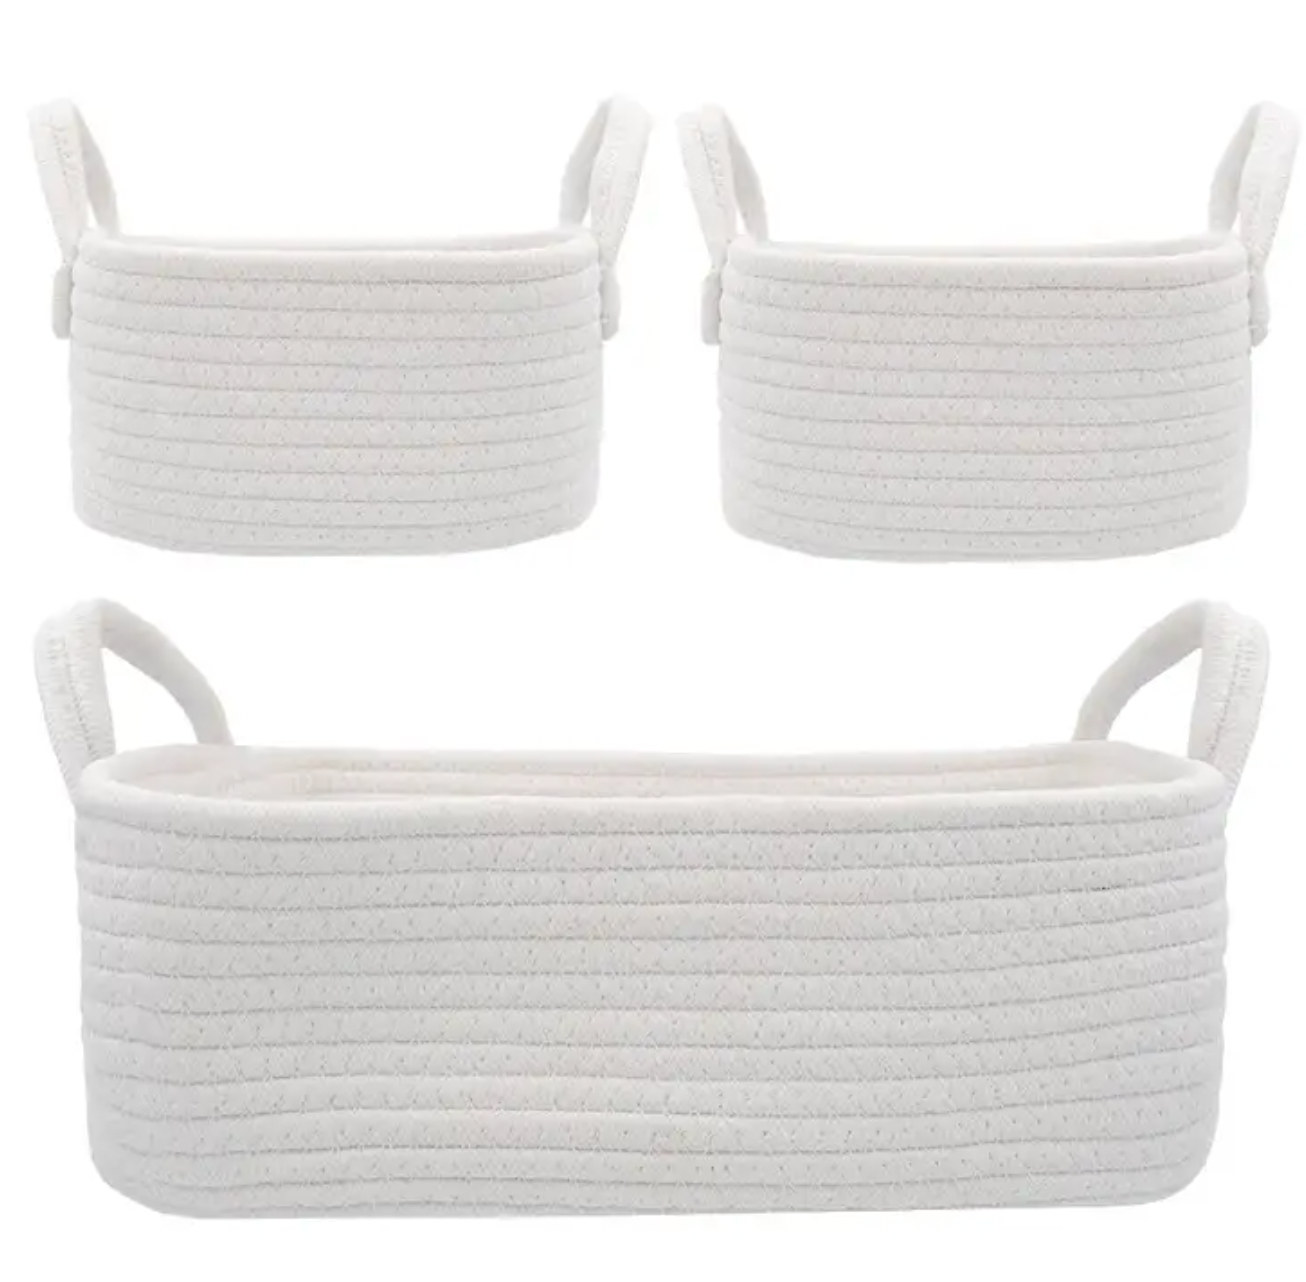 Set of 3 Cotton Rope Baskets, White